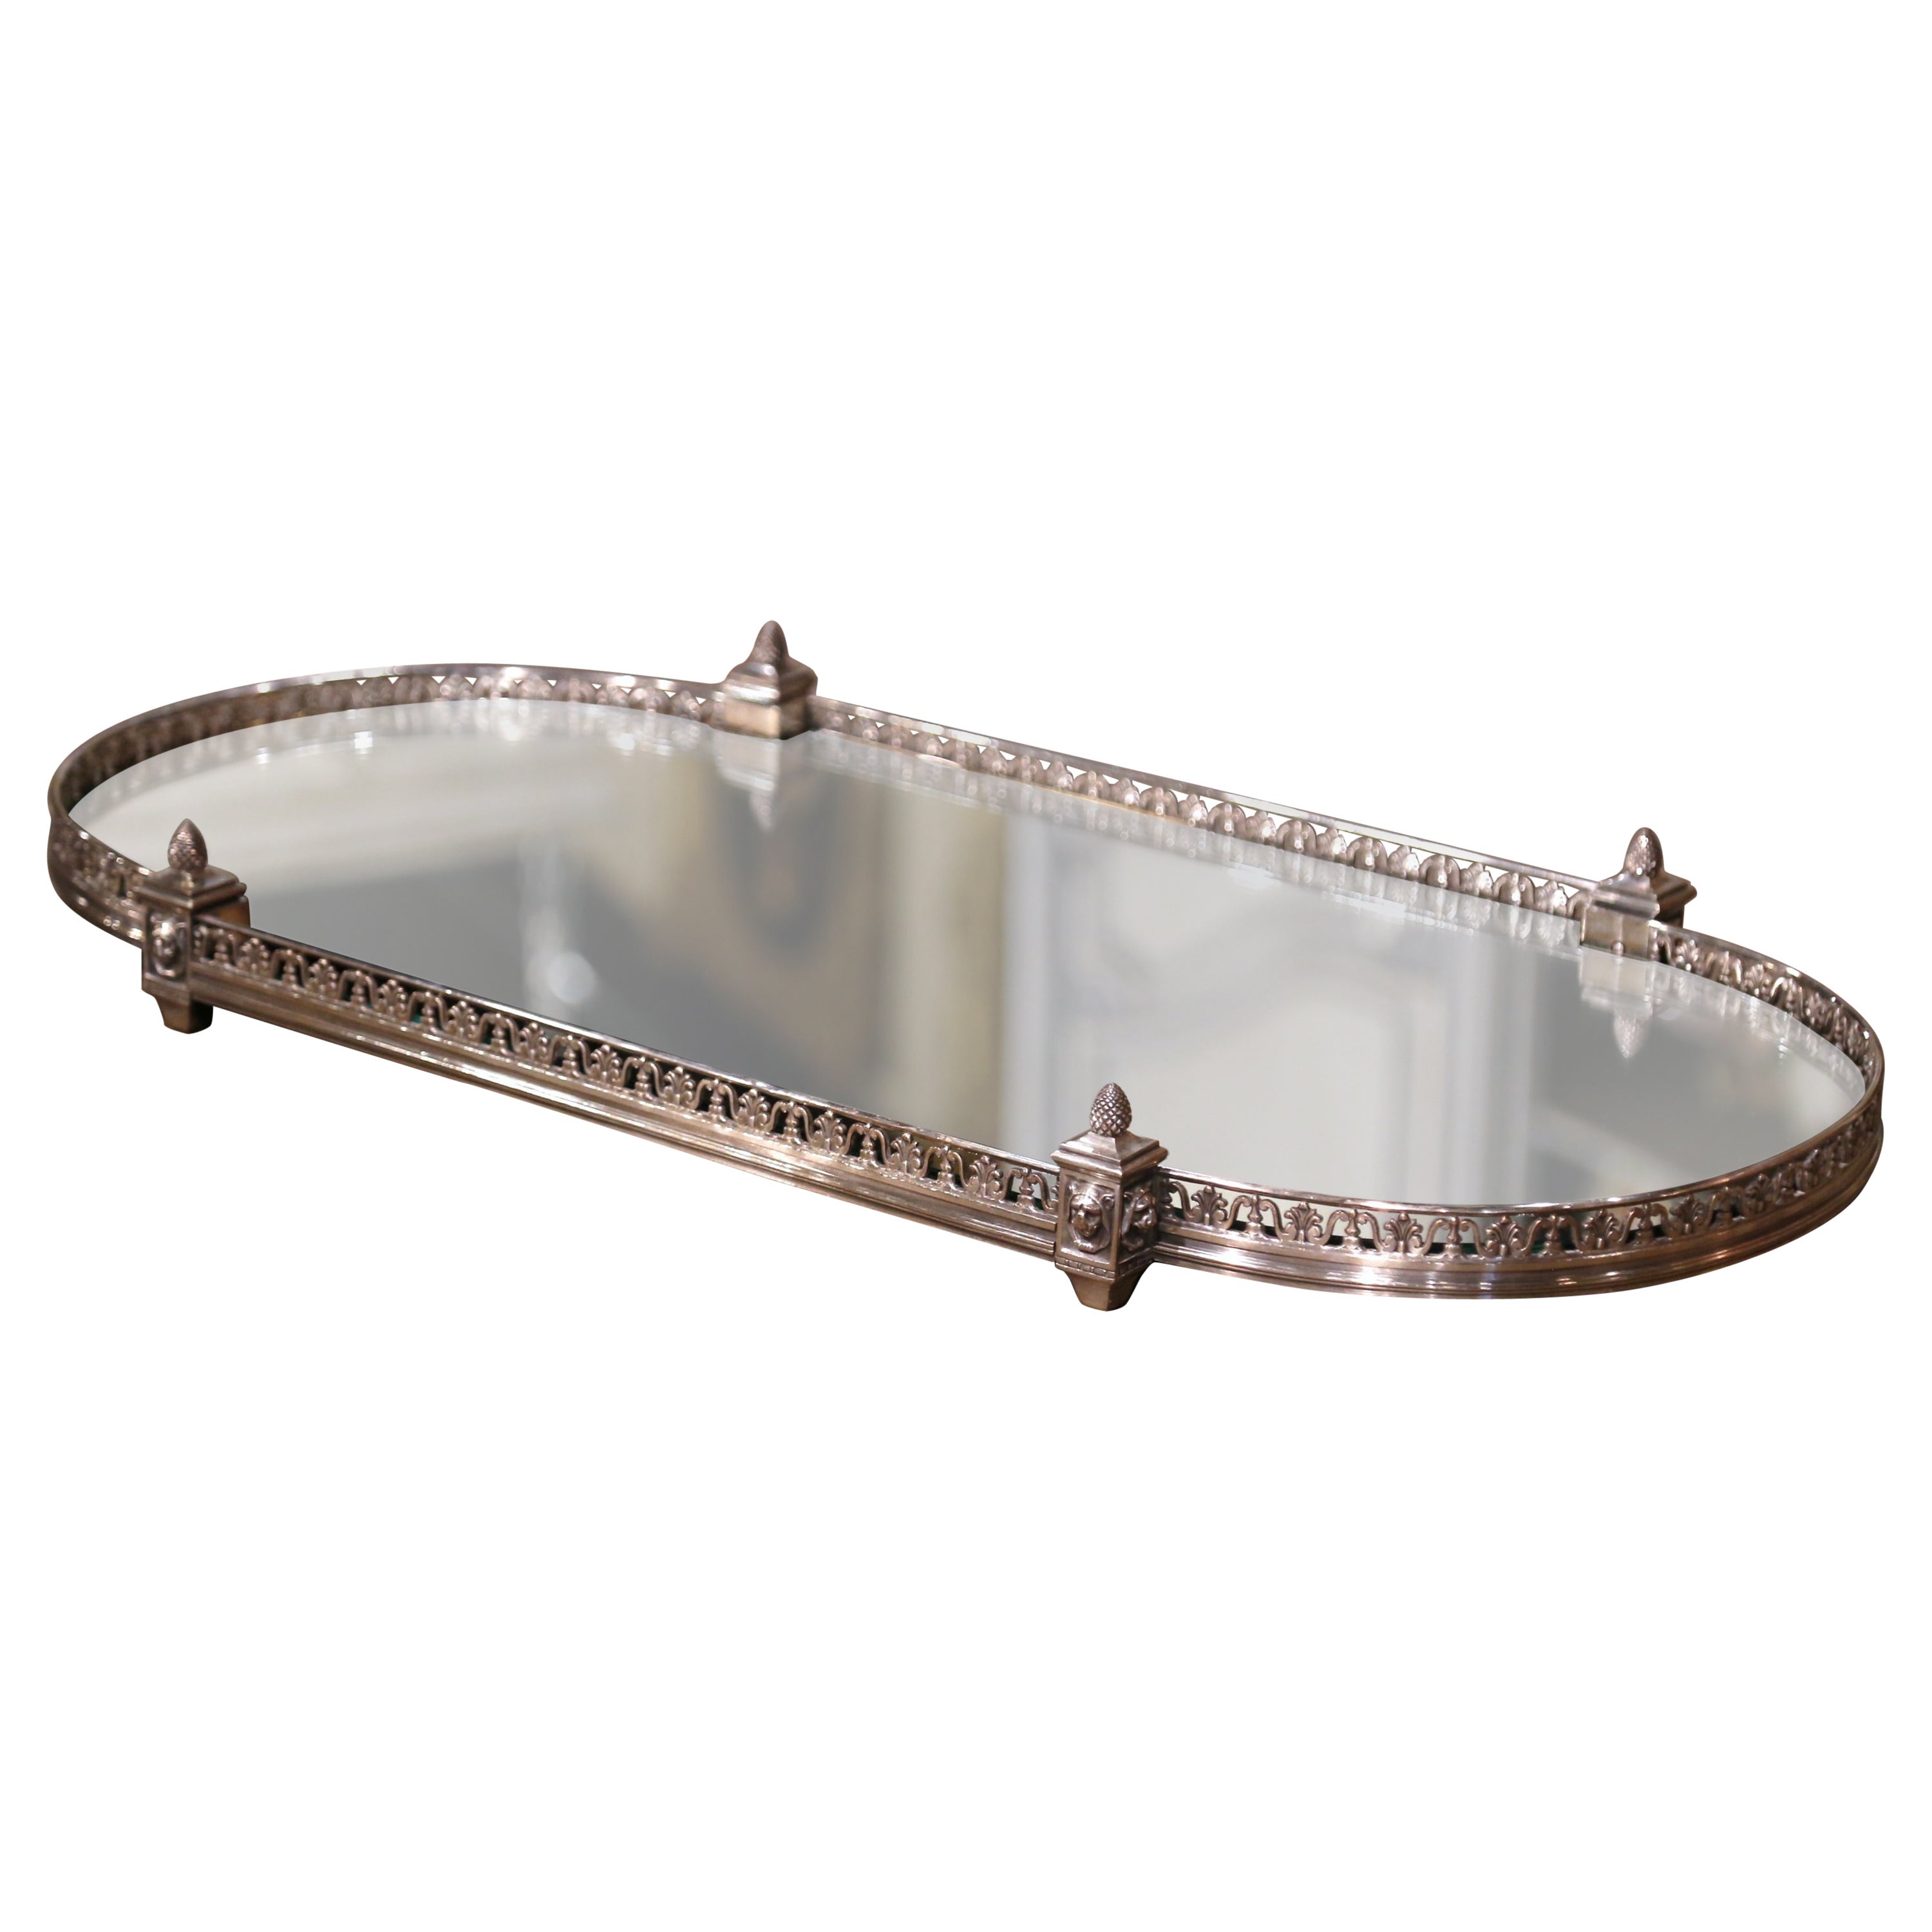  19th Century French Silvered Bronze Mirrored "Surtout de Table" from Christofle